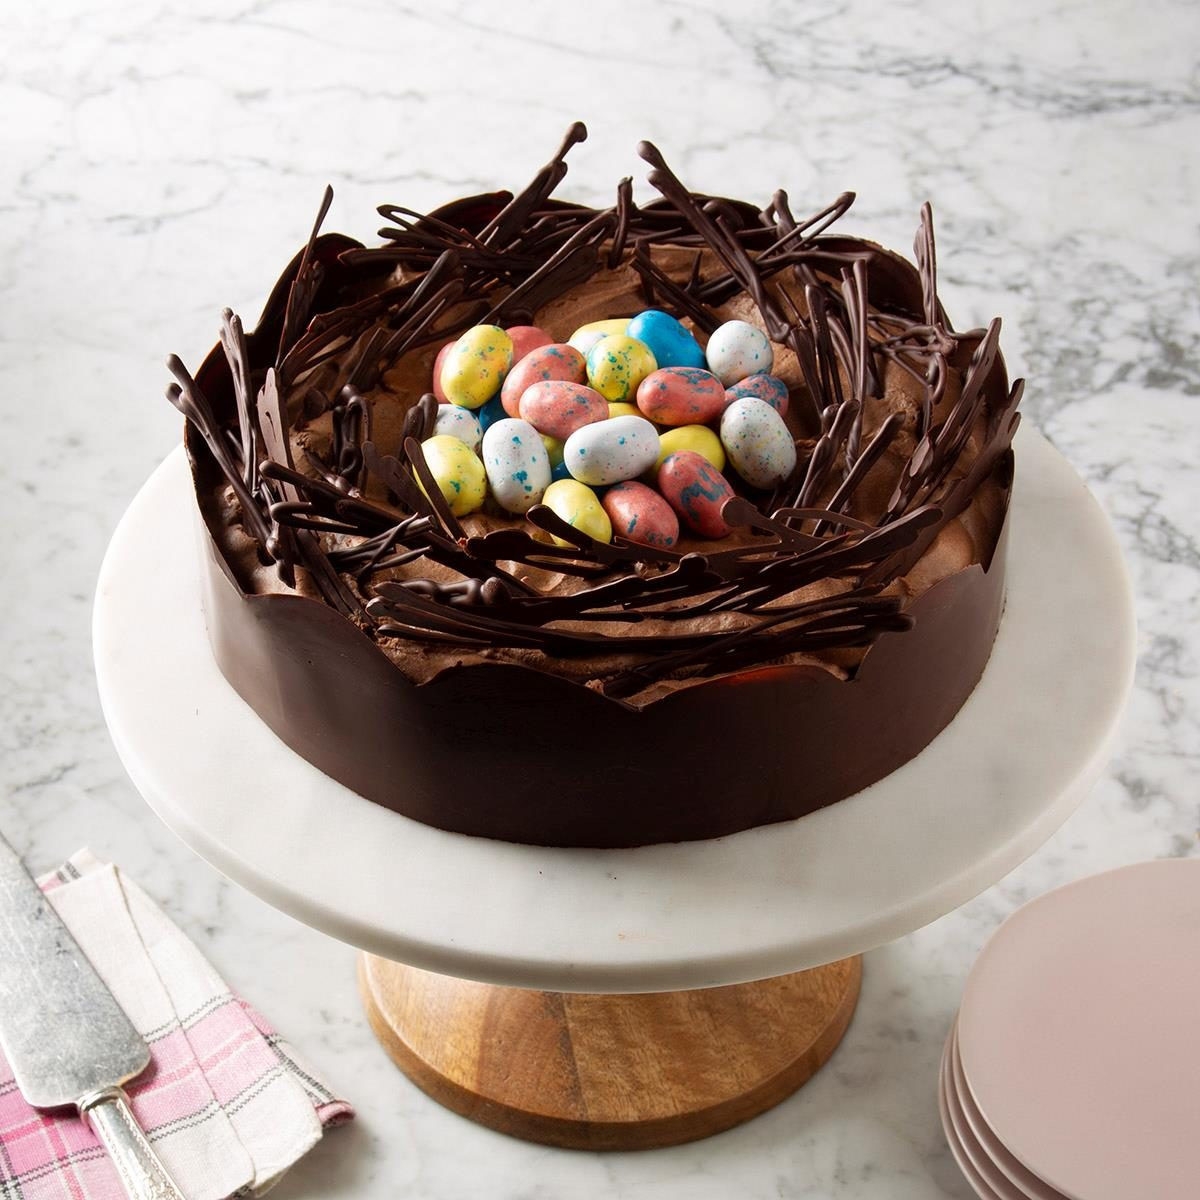 Easter Bunny Desserts
 35 Fabulous Desserts That e Up the Easter Bunny